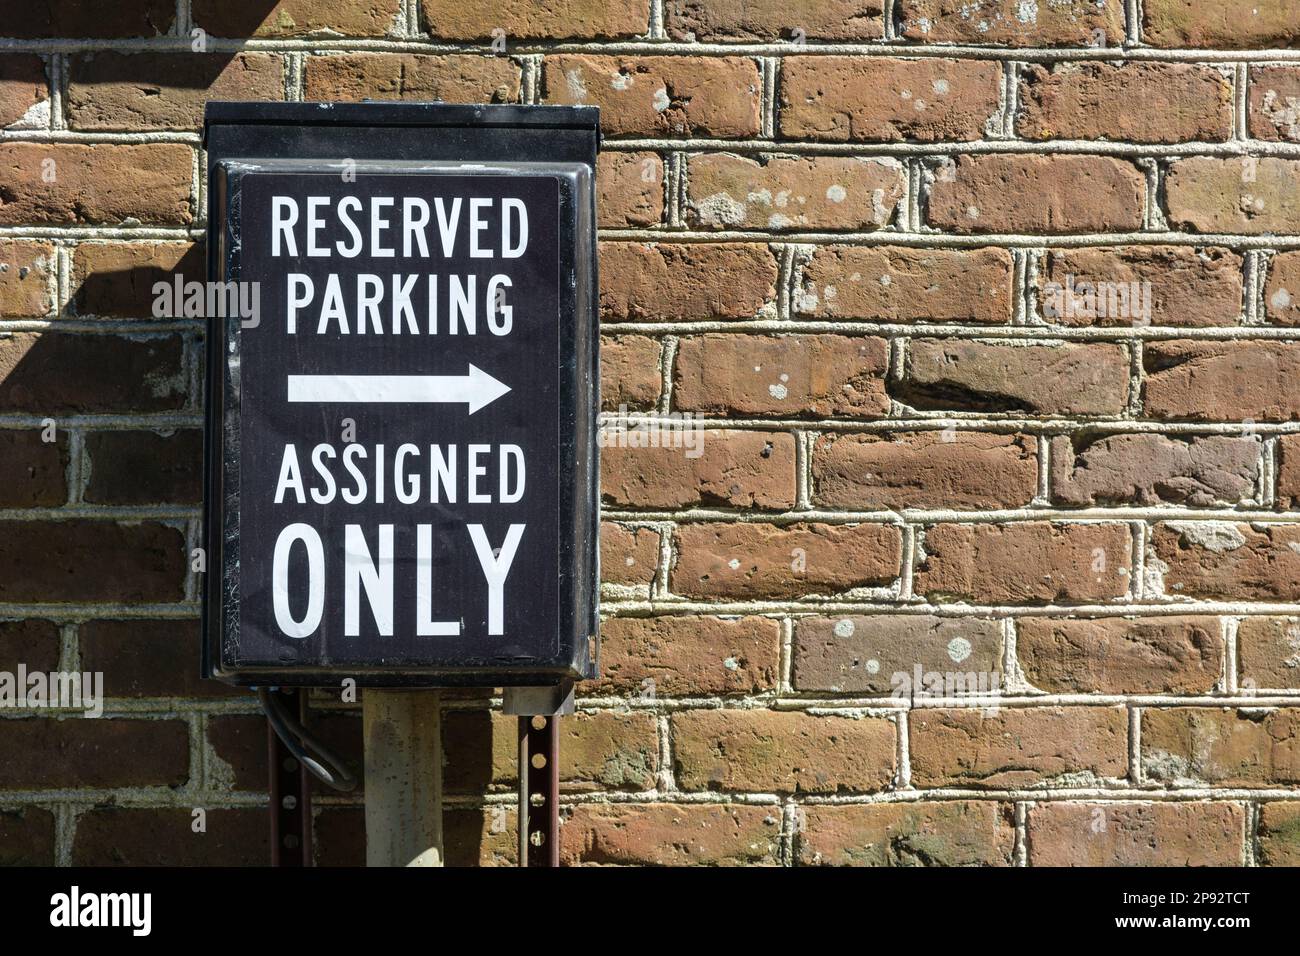 Reserved Parking and Assigned Only sign against a red brick wall Stock Photo